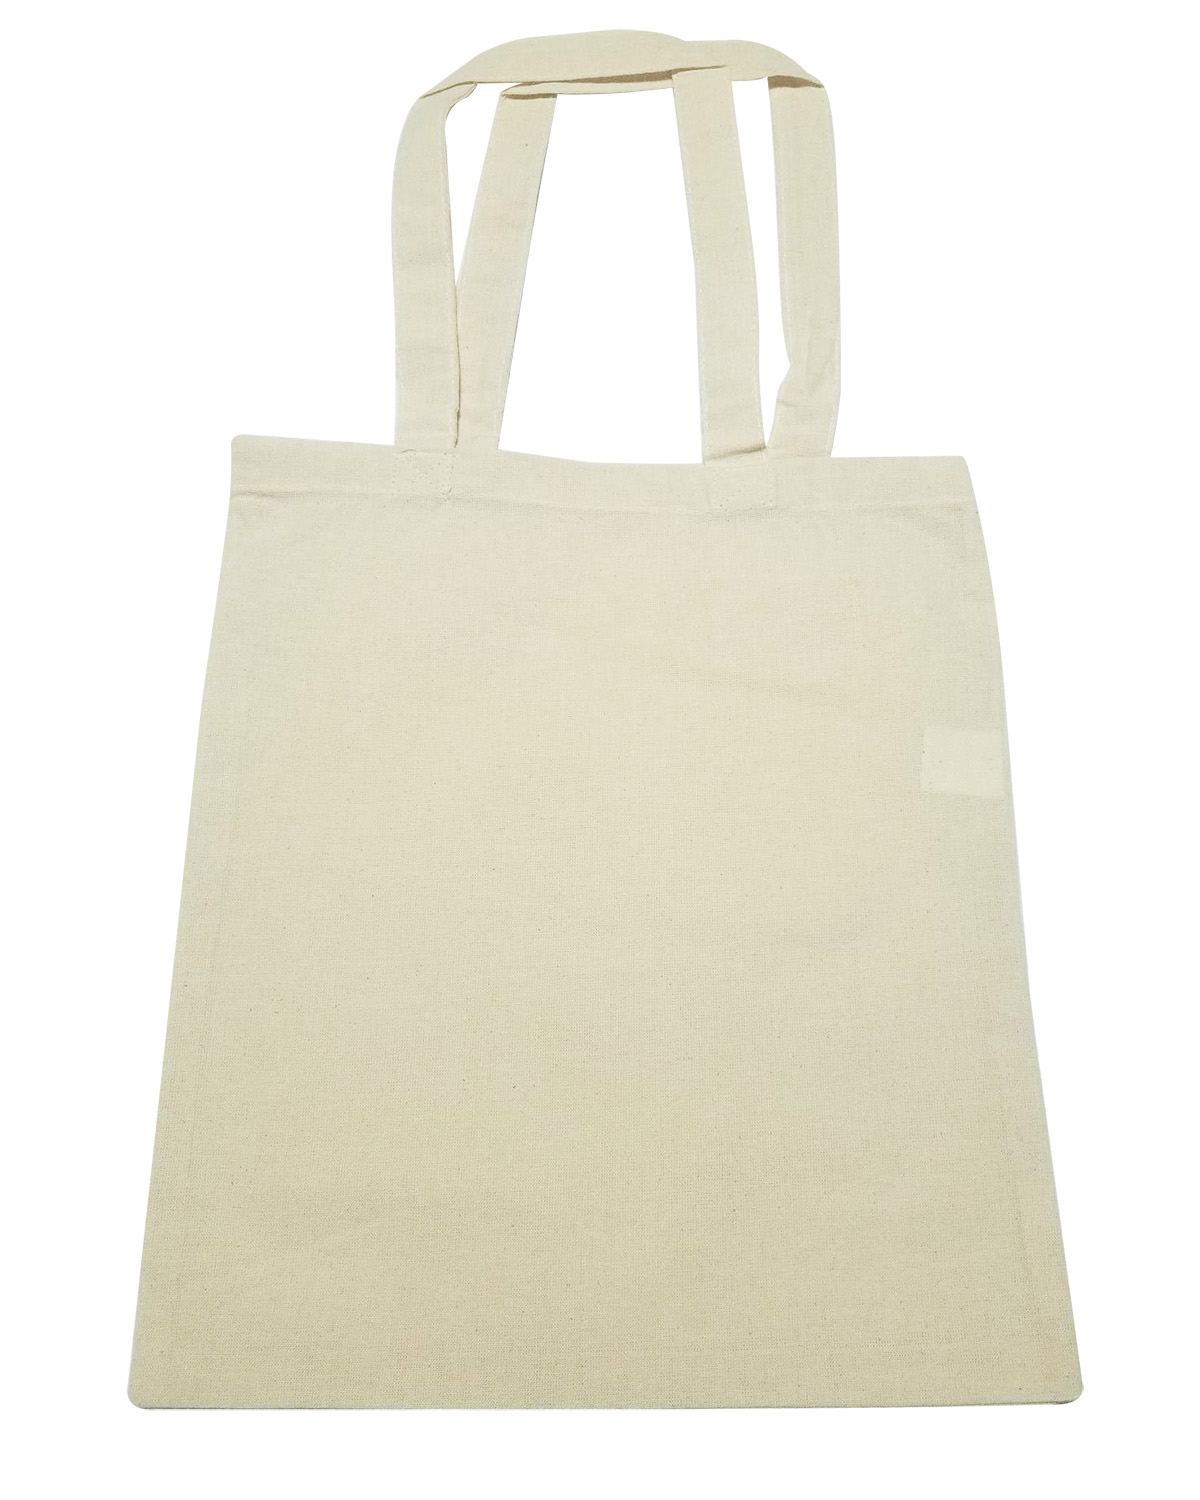 ''Natural Cotton Canvas Tote Bags - 11'''' x 13''''''